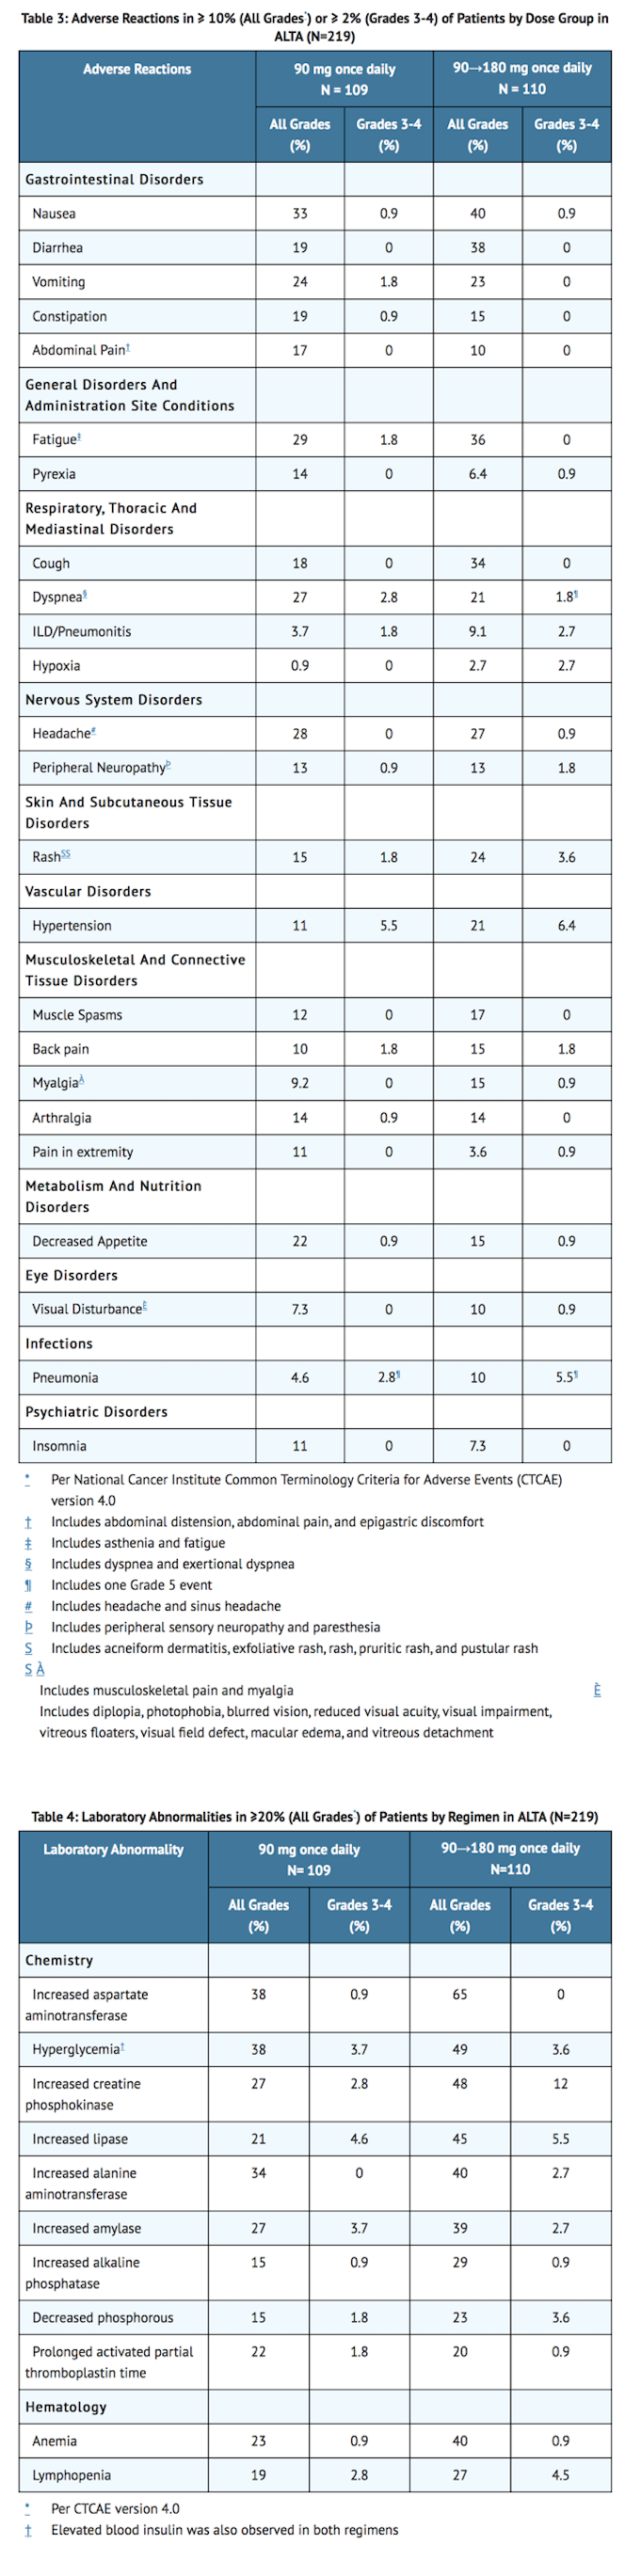 File:Brigatinib Adverse Reactions Tables 1 and 2.png